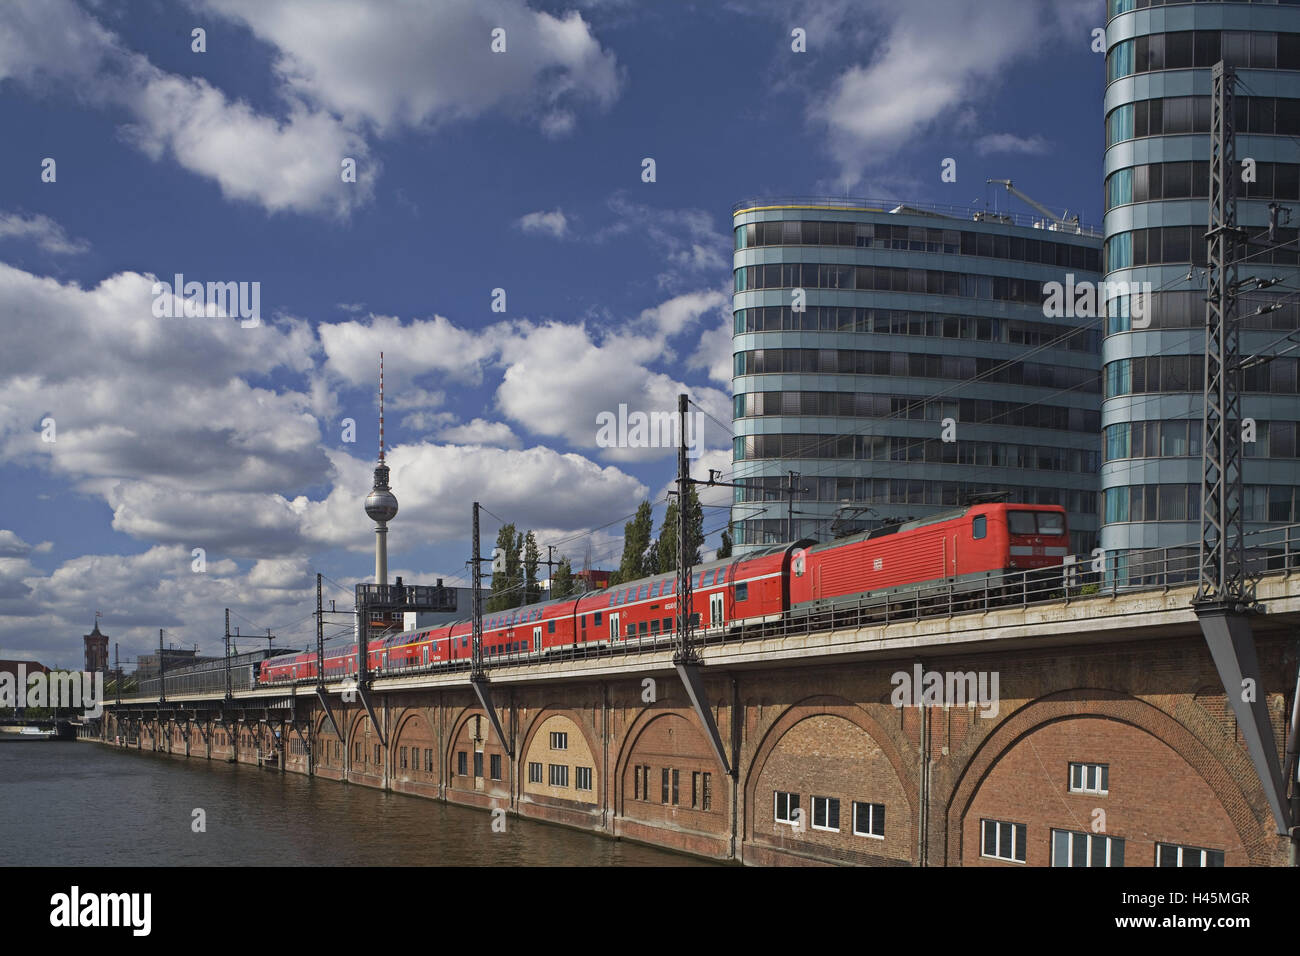 Germany, Berlin, television tower, city Tower, train, river Spree, town, capital, architecture, building, tower, traffic, high rises, houses, rail transports, railway, trajectory, heaven, clouds, Stock Photo